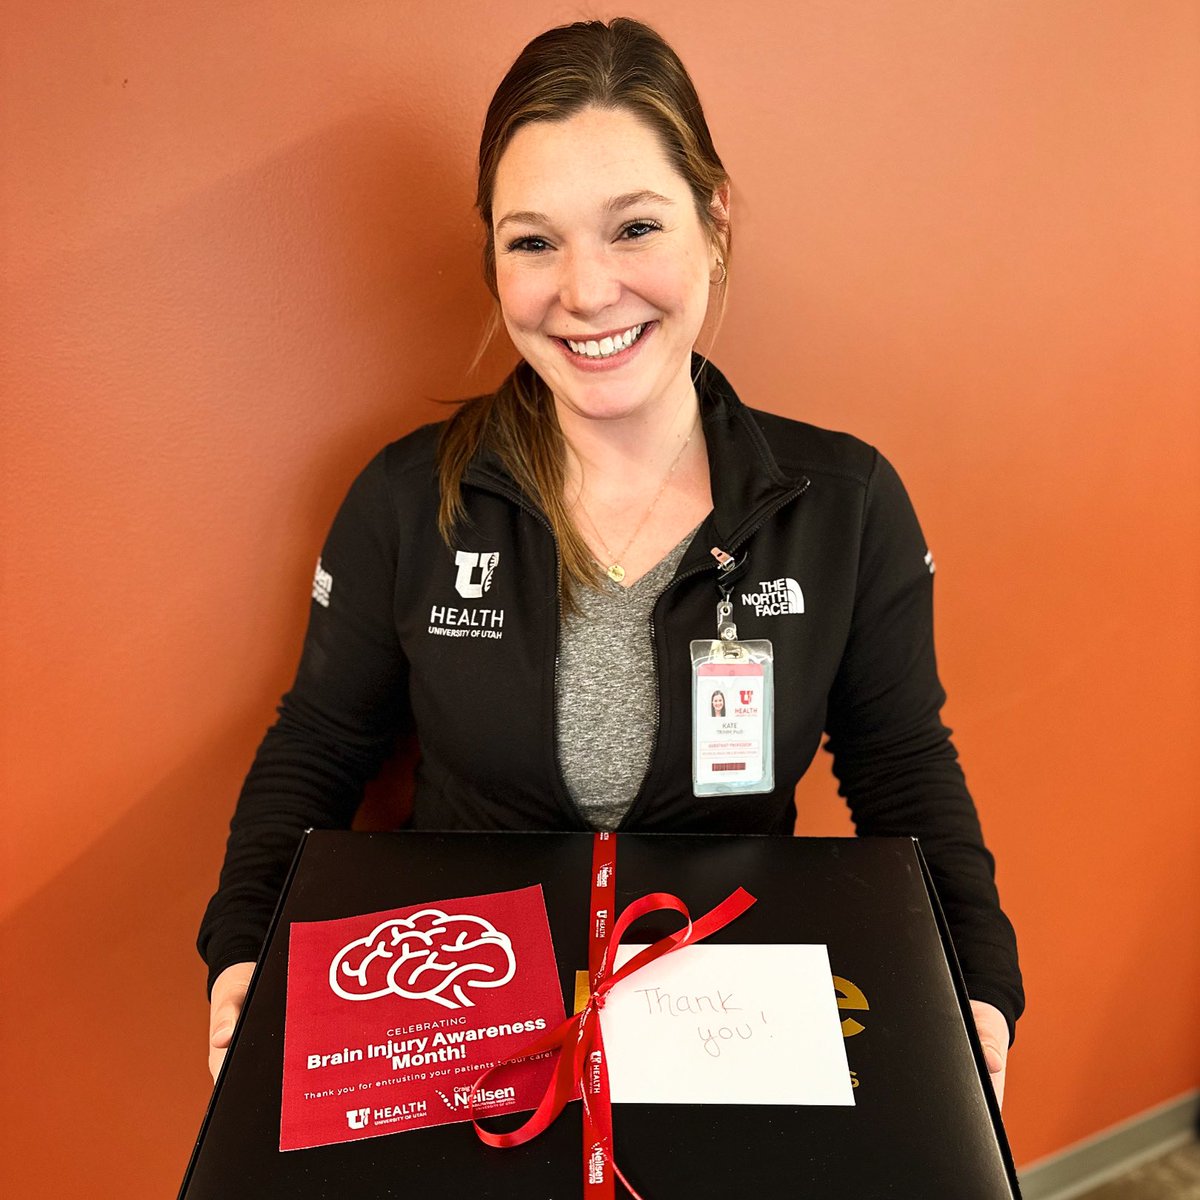 OUR PEOPLE: Meet Kate Trimm, PsyD is one of our amazing Rehabilitation Psychologists. She helped us share our gratitude today with our acute Neurological and Trauma teams. Thank you for entrusting us to care for your patients. #BrainInjuryAwarenessMonth